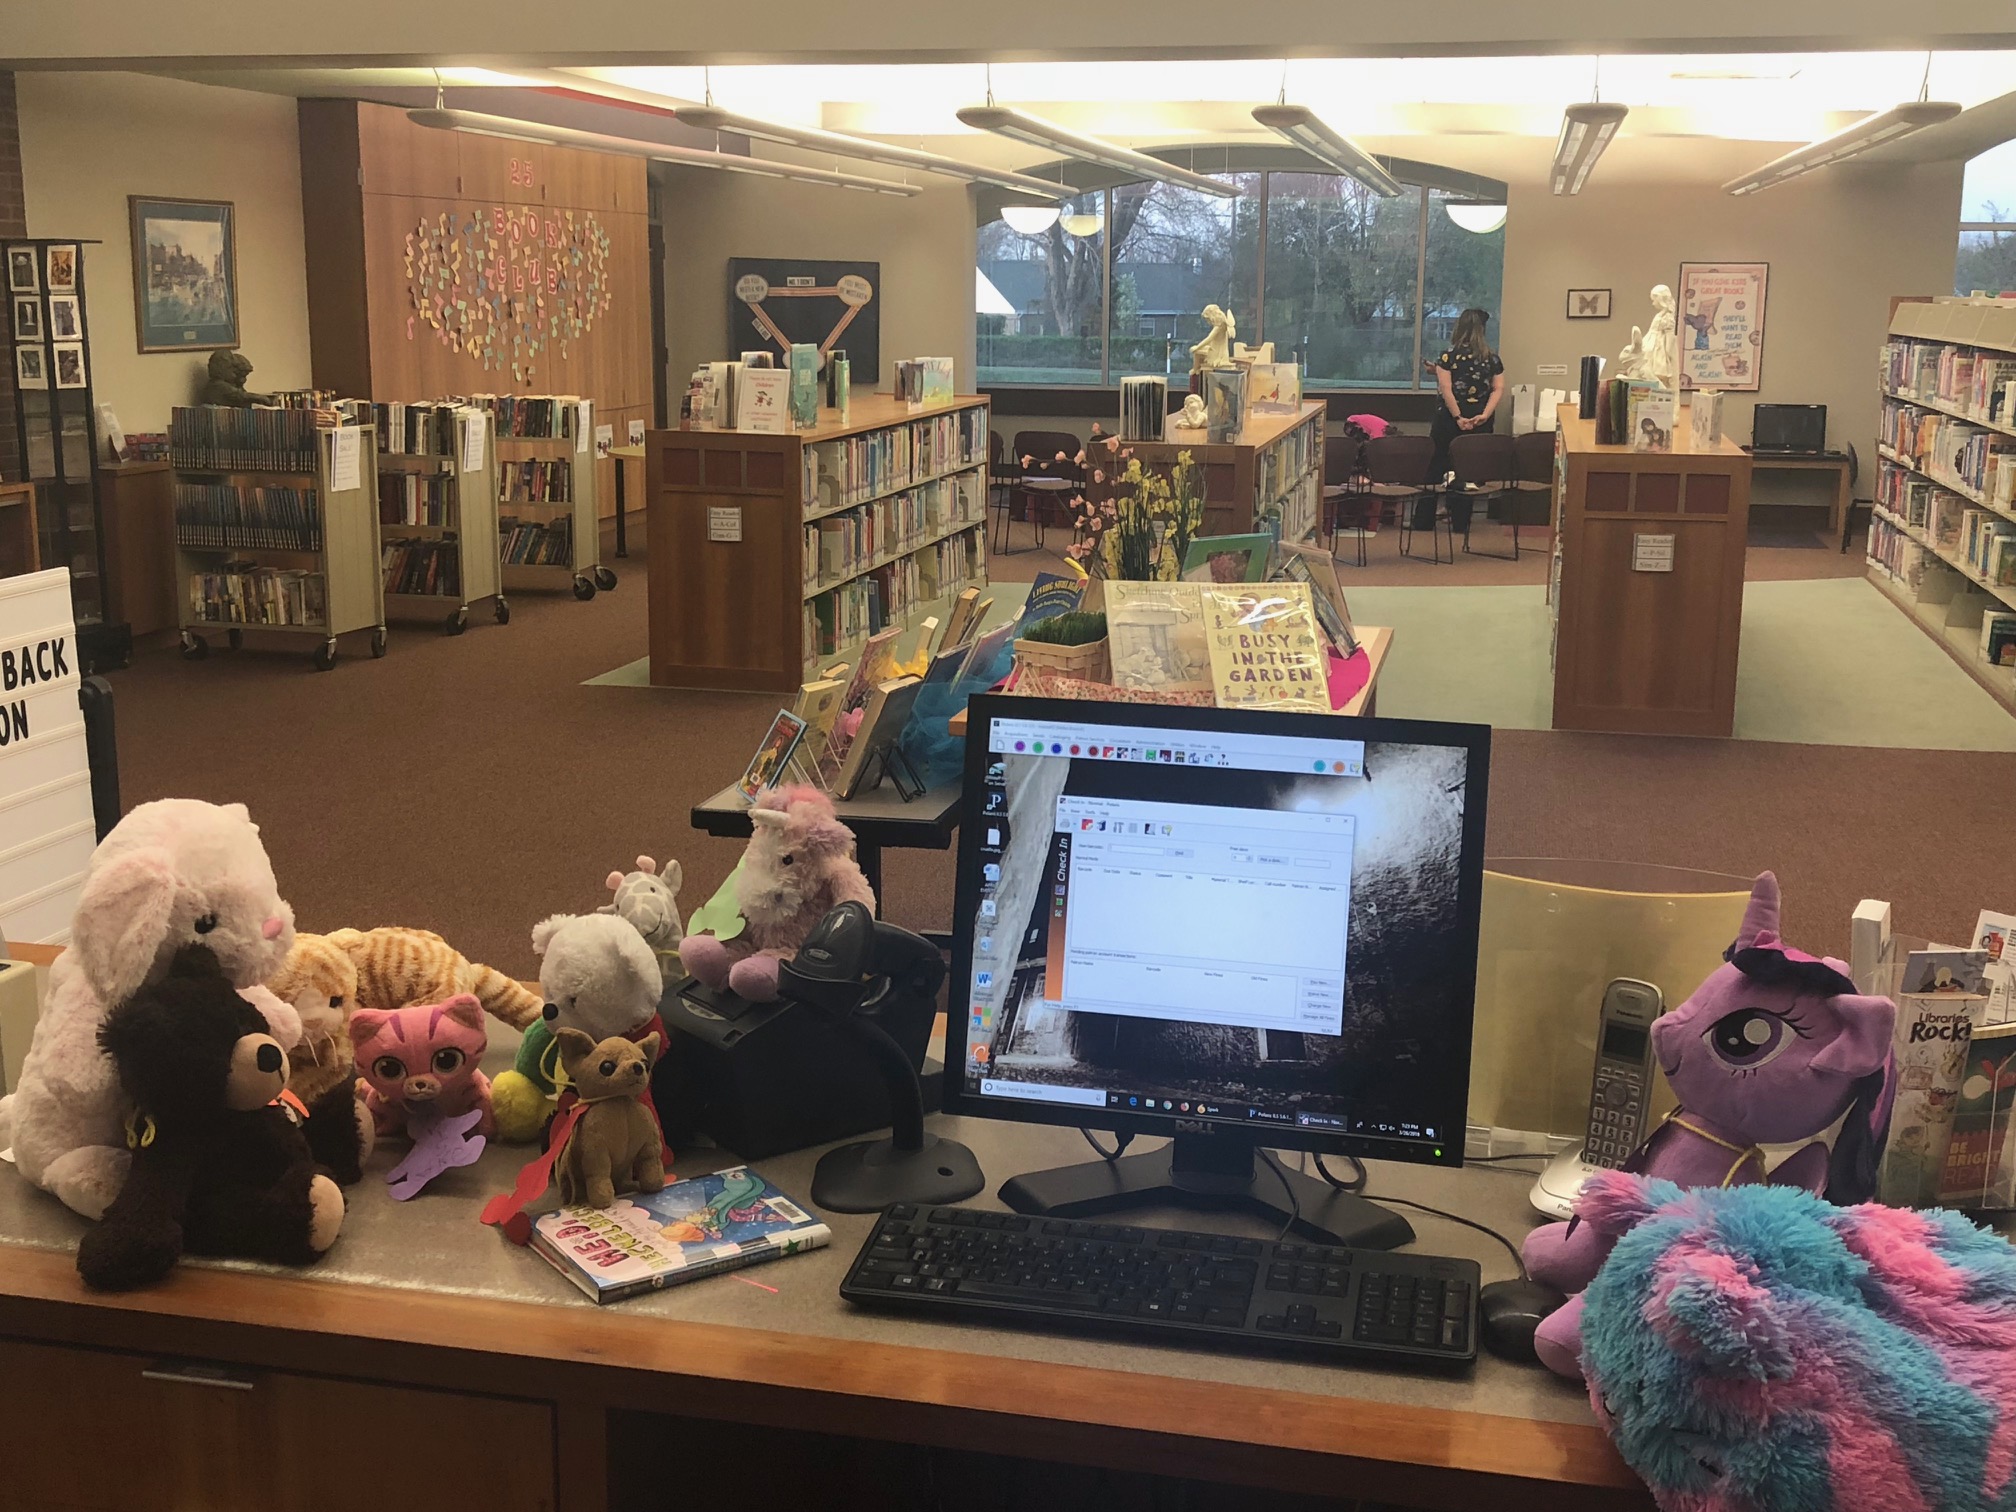 Stuffed animals helping check in books.